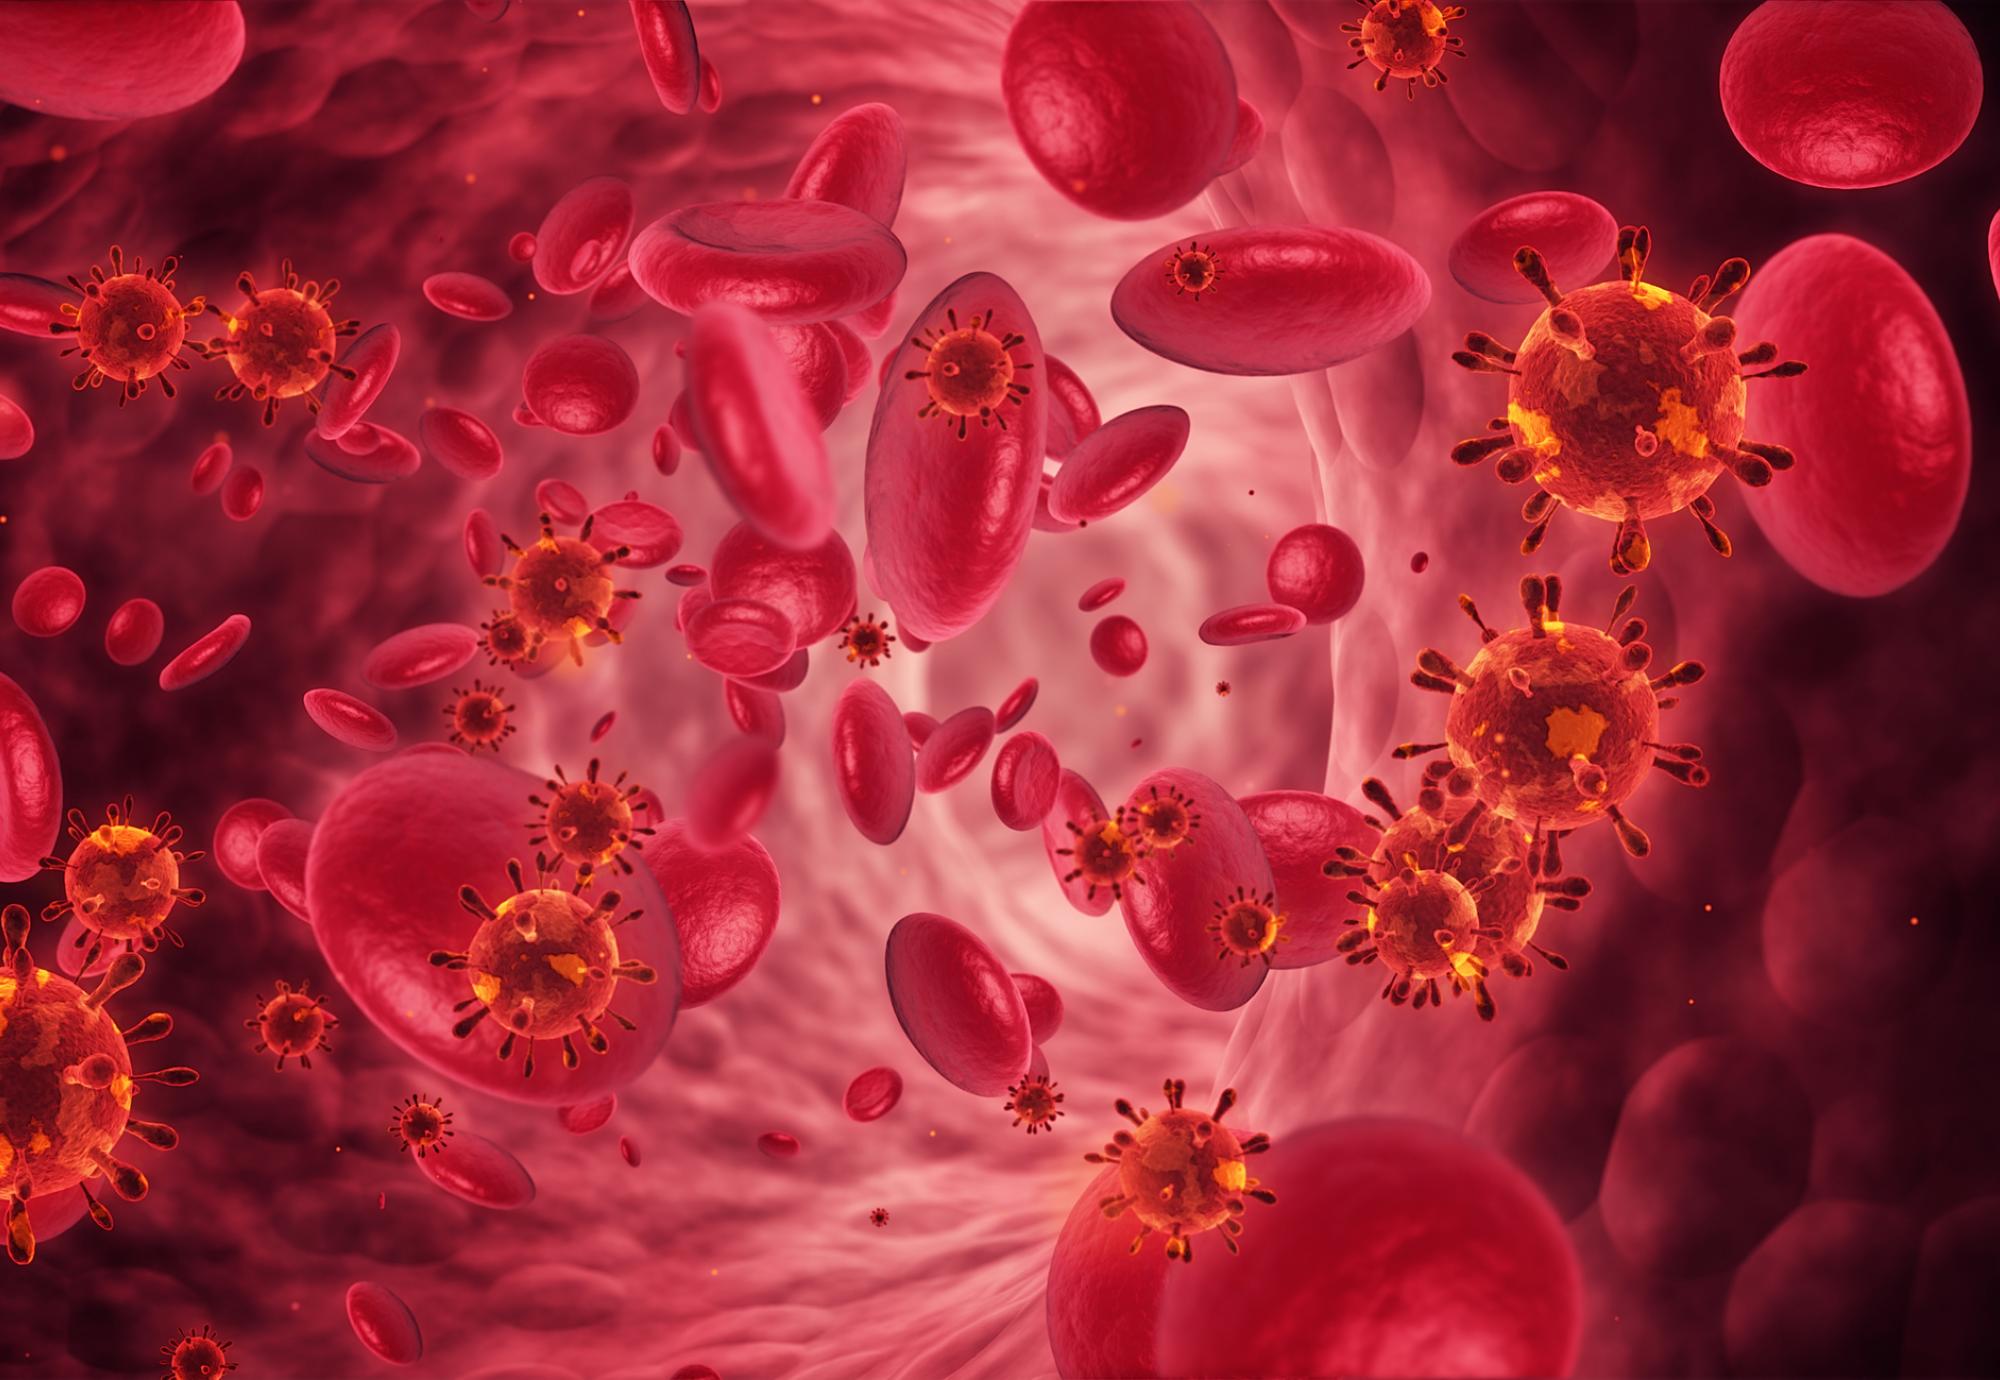 Artist impression of red blood cells and bacterium within circulatory system